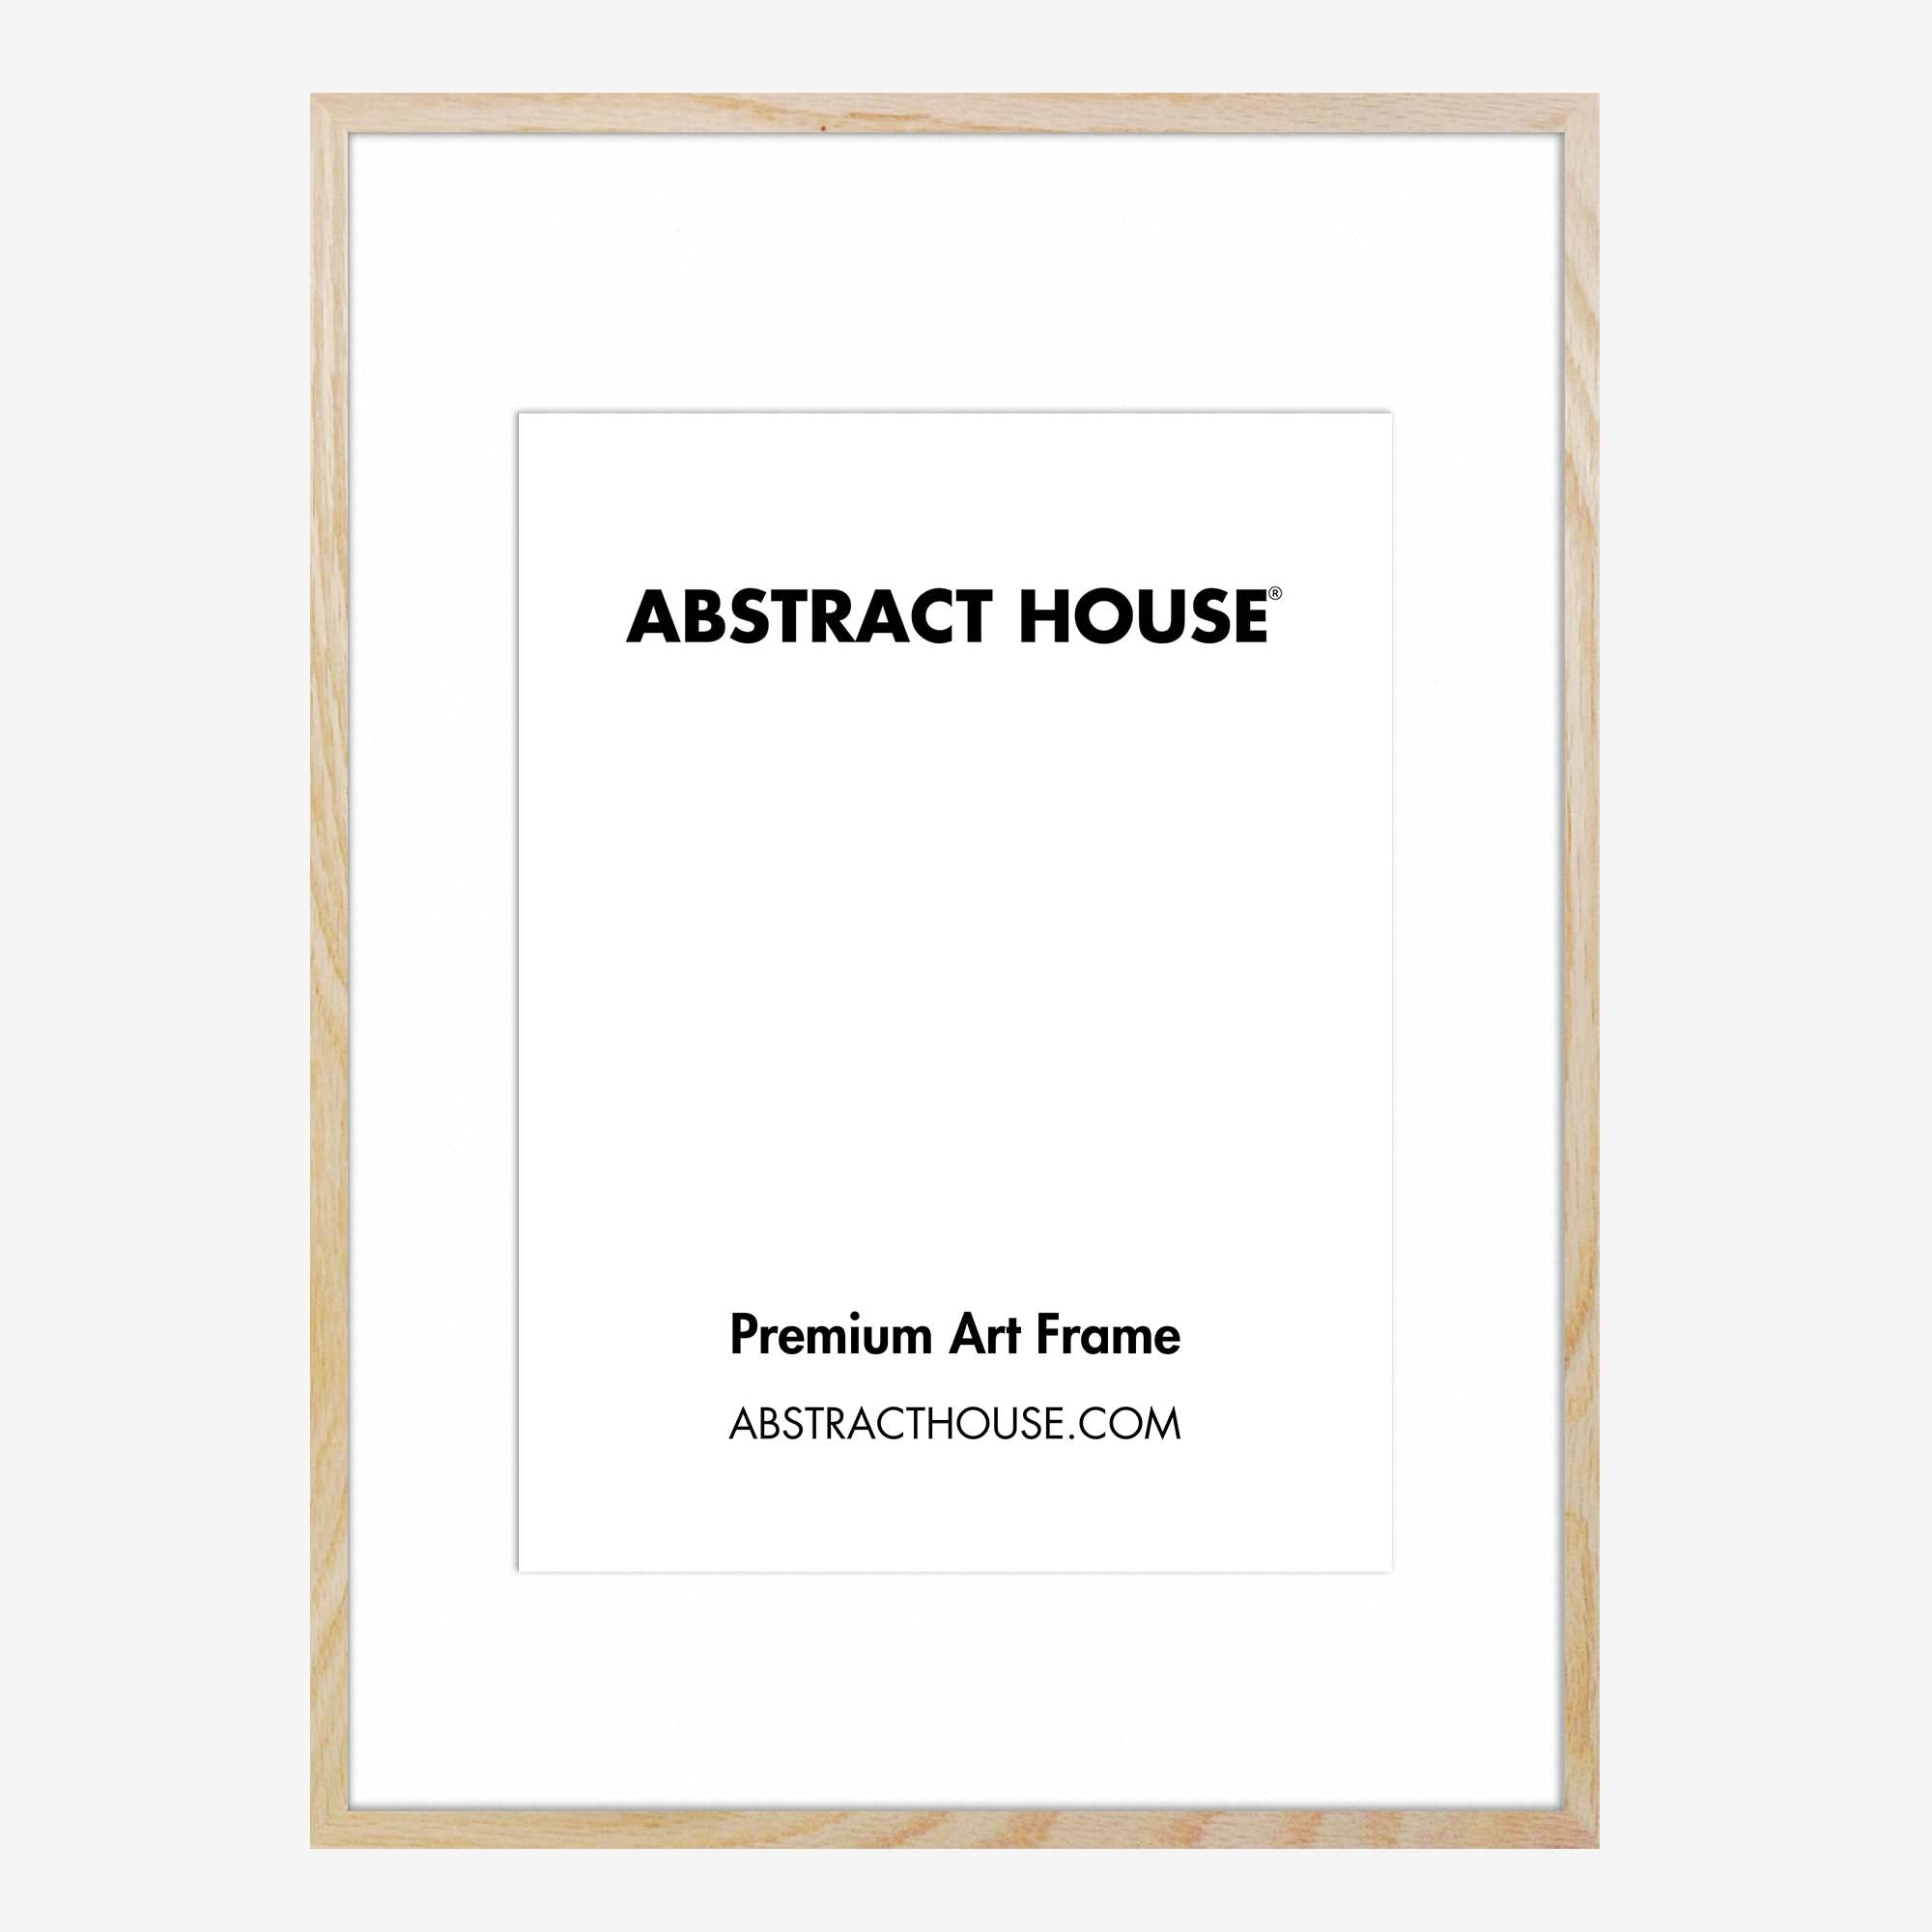 100 x 70 cm Wooden Picture Frame-Oak-50 x 70 cm-Abstract House